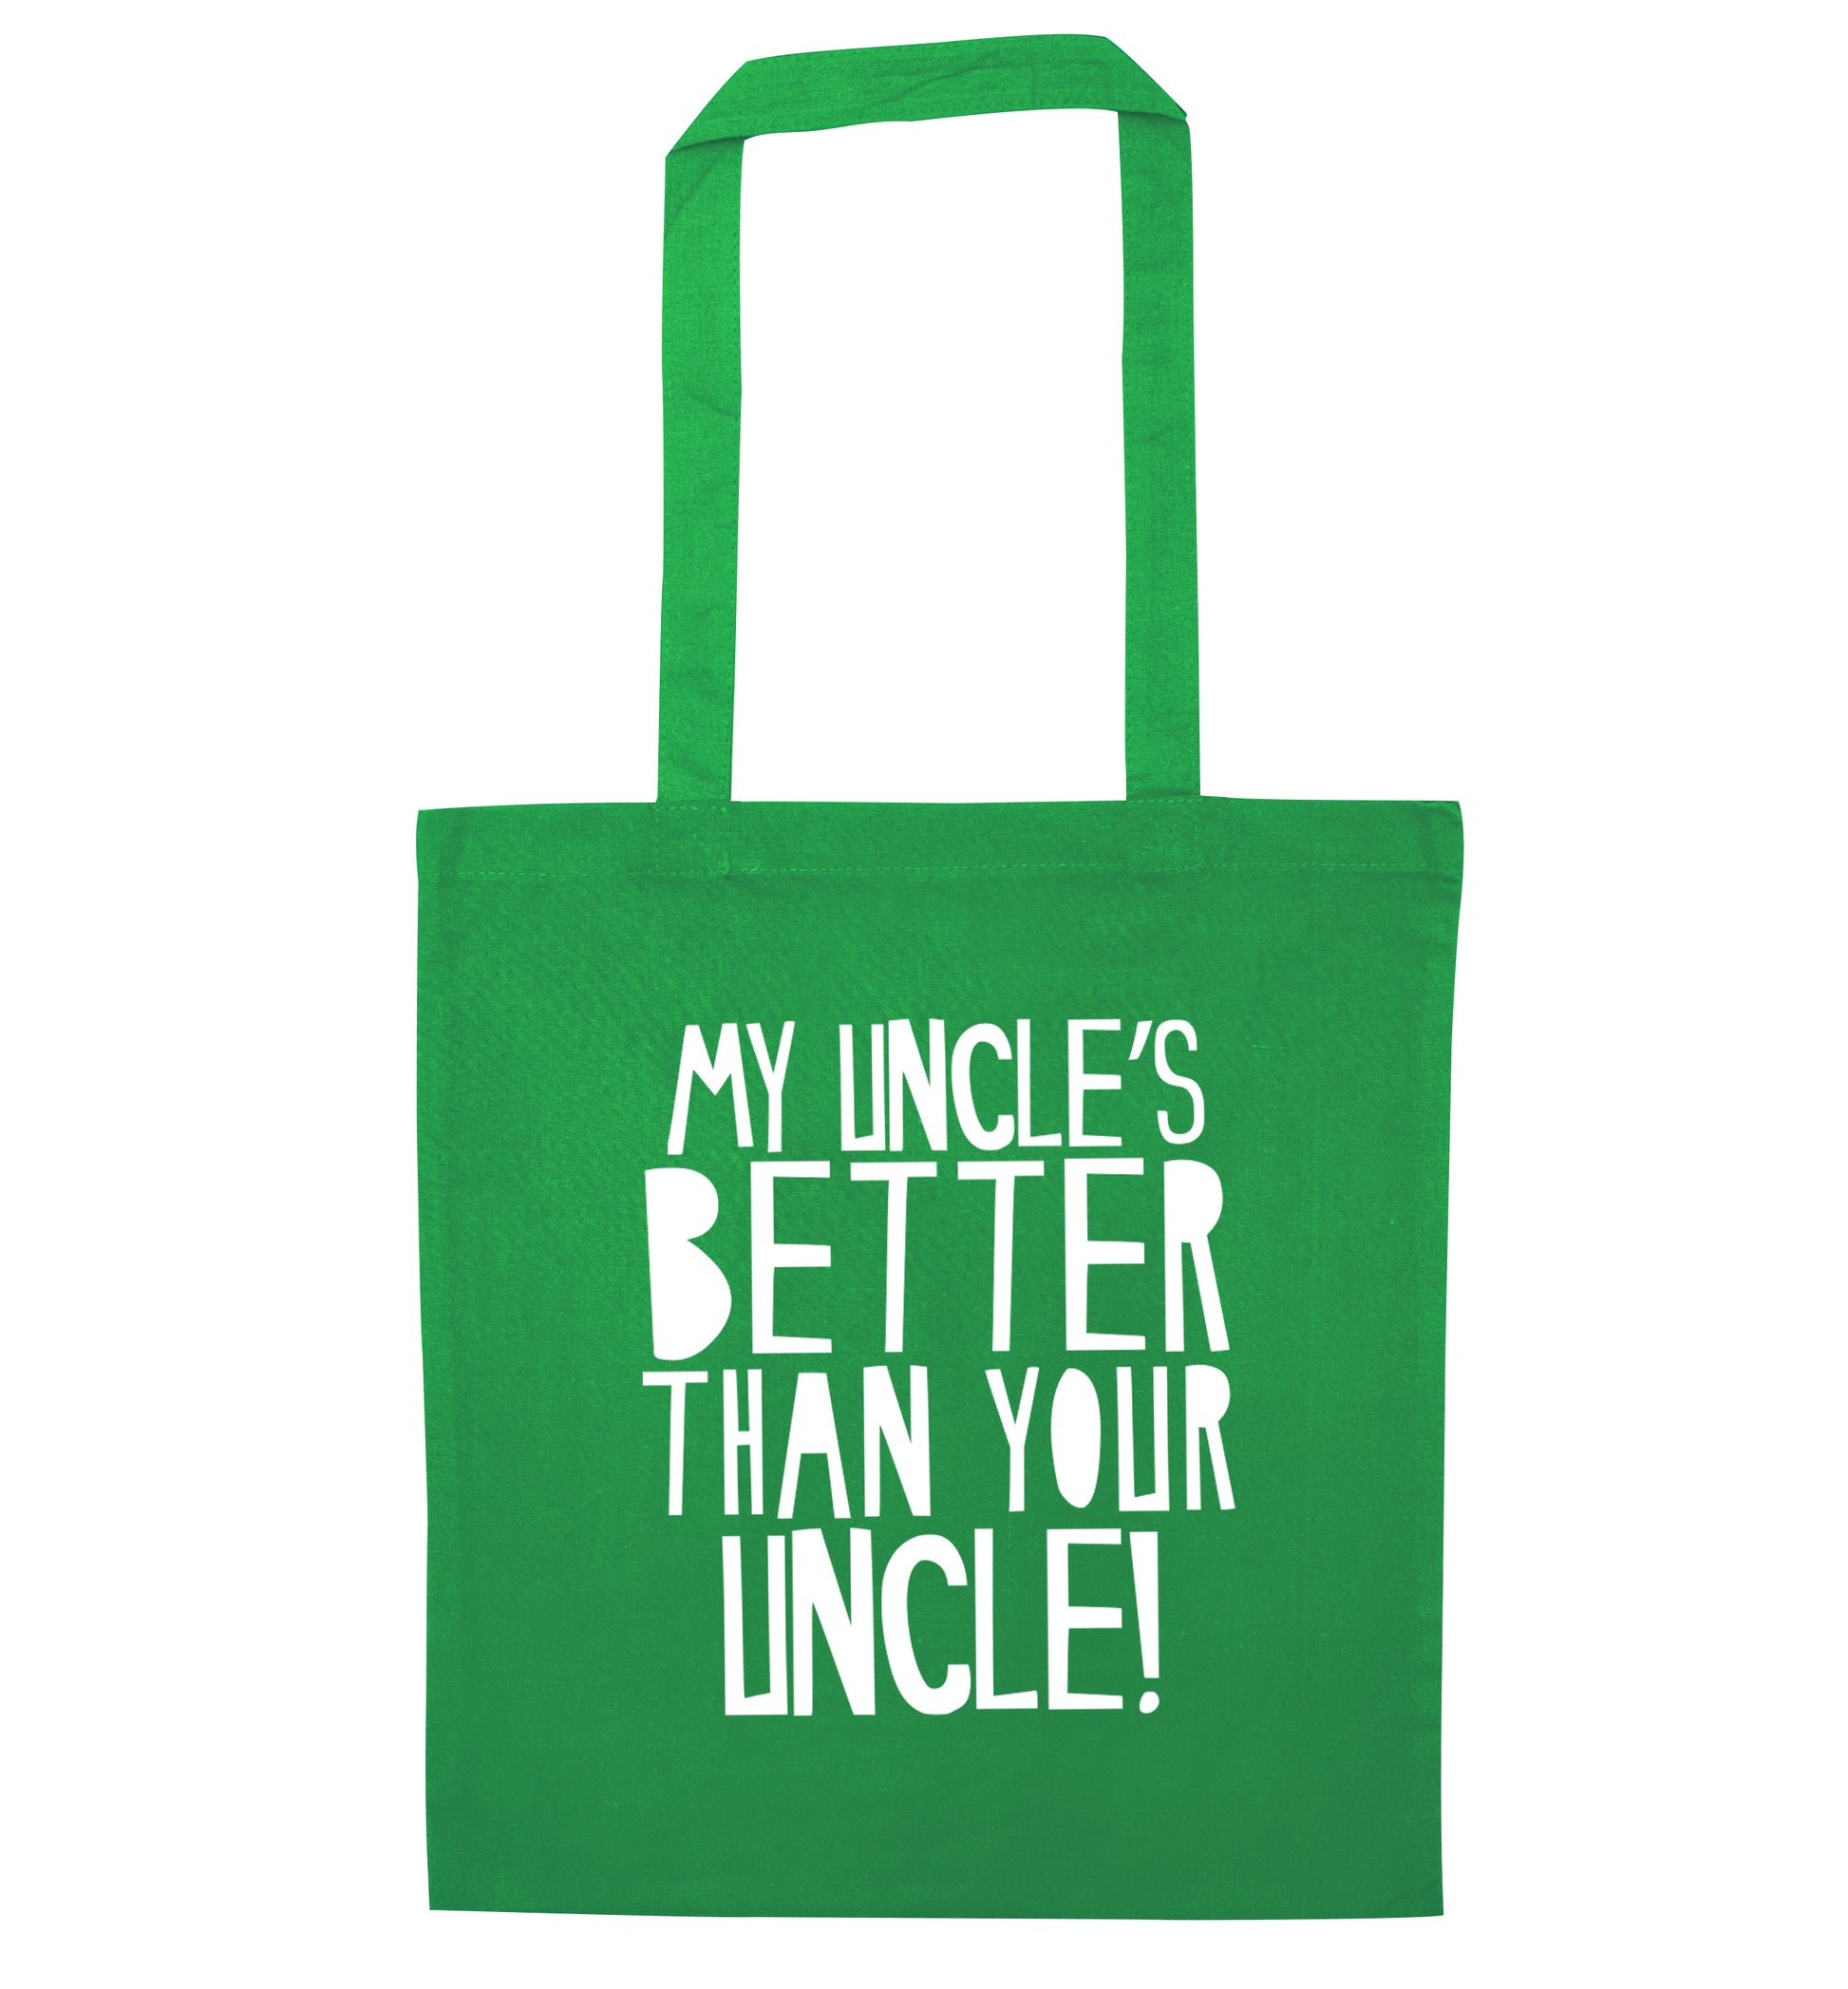 My uncles better than your uncle green tote bag